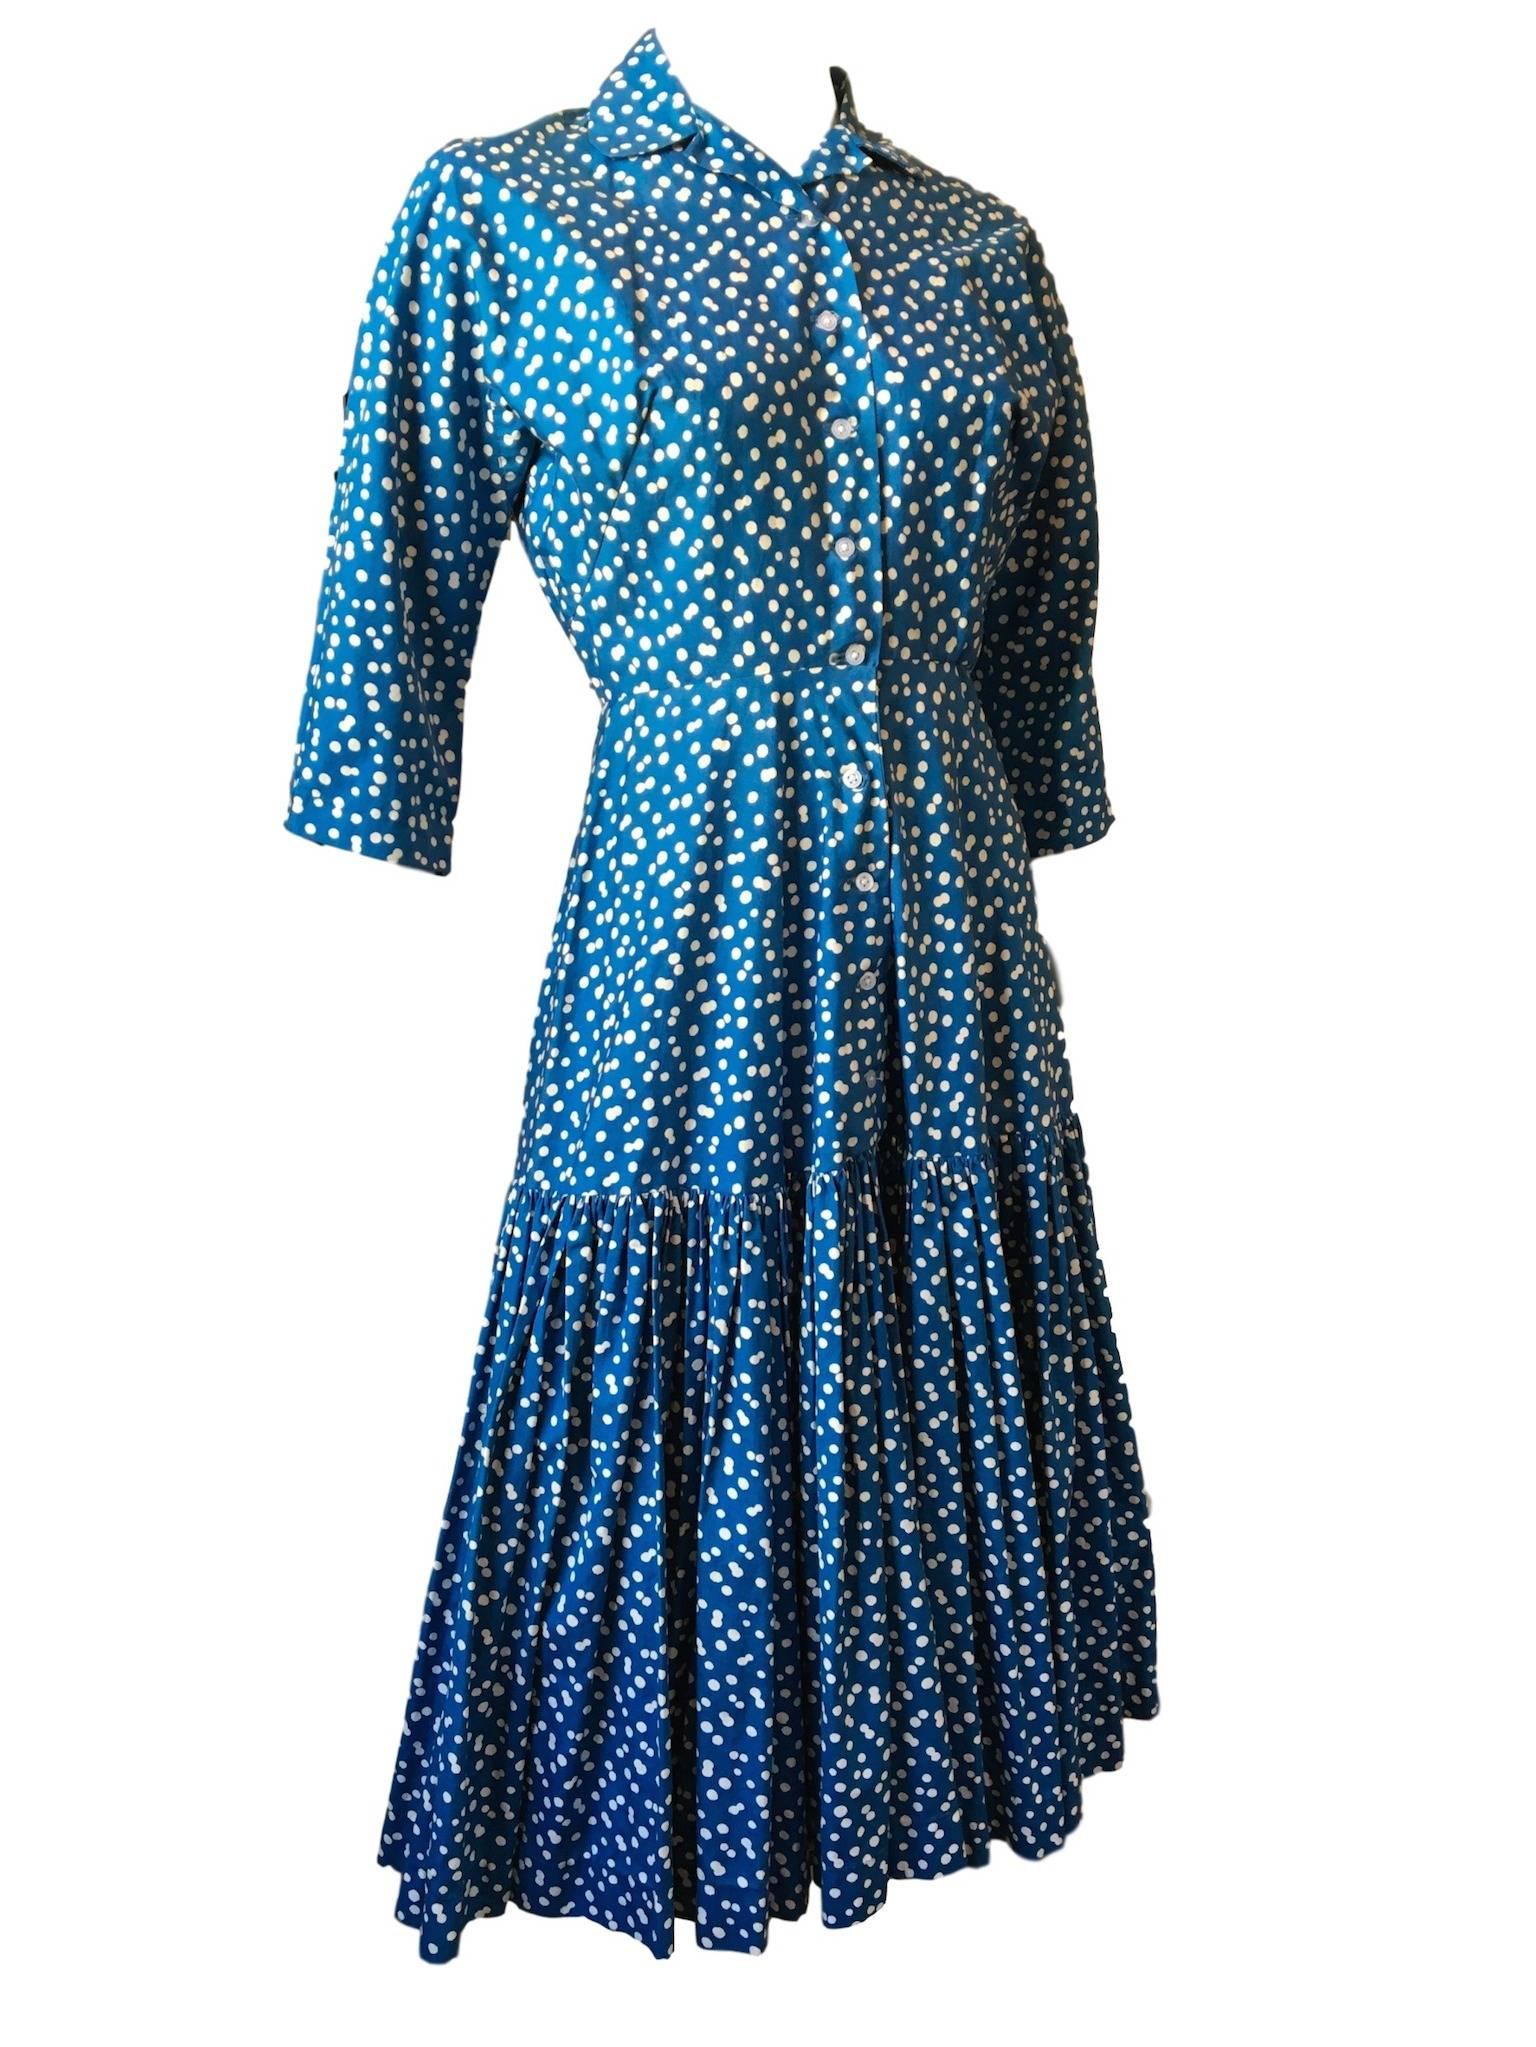 Original Horrockses blue and white polka dot dress, with dropped waist, cropped sleeves and button front fastening, has belt loops but no belt remains. 

Size 8 measures 16 inches across bust 12.5 inches across waist and 48 inches length.